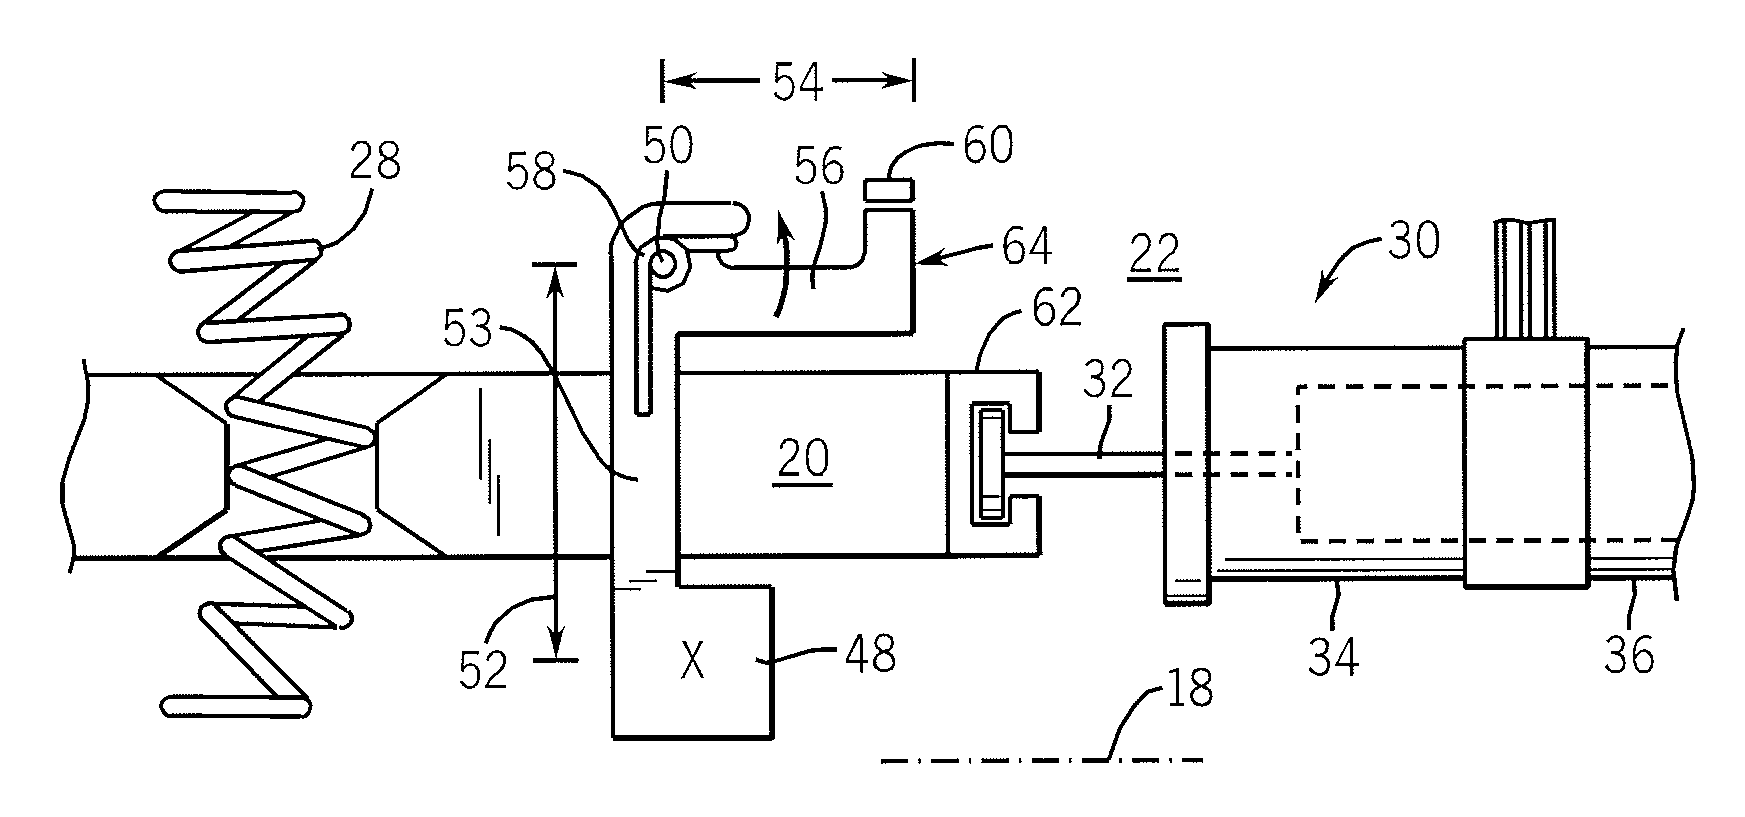 Low power consumption lock for appliance latch